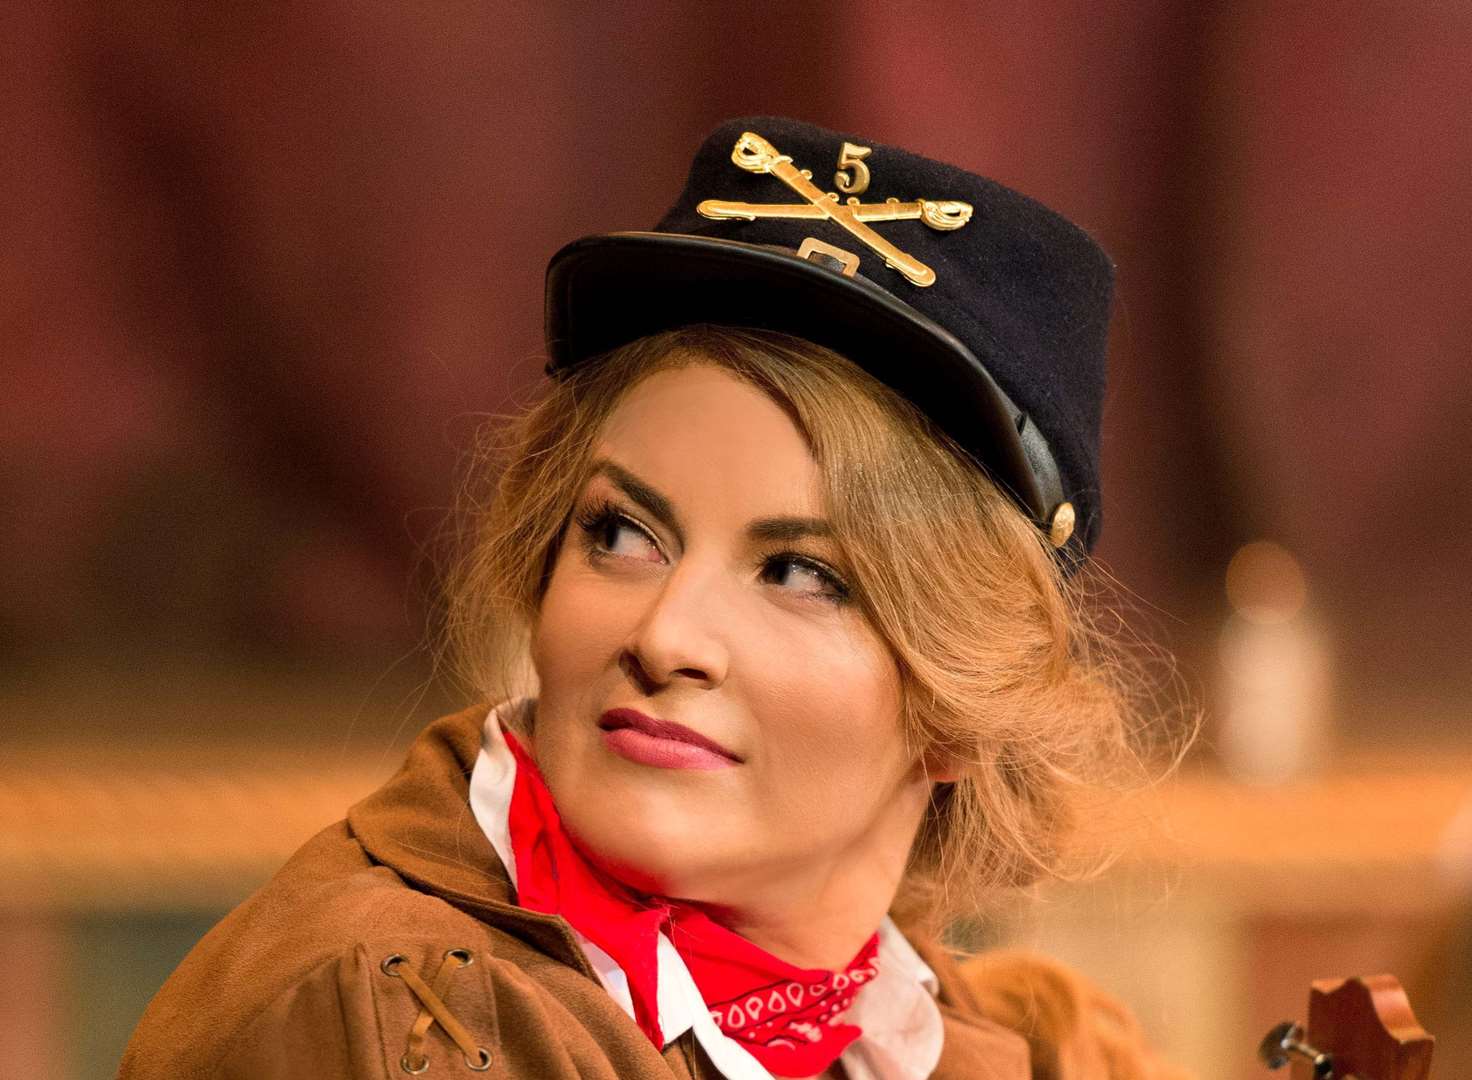 Review: Calamity Jane at the Orchard Theatre